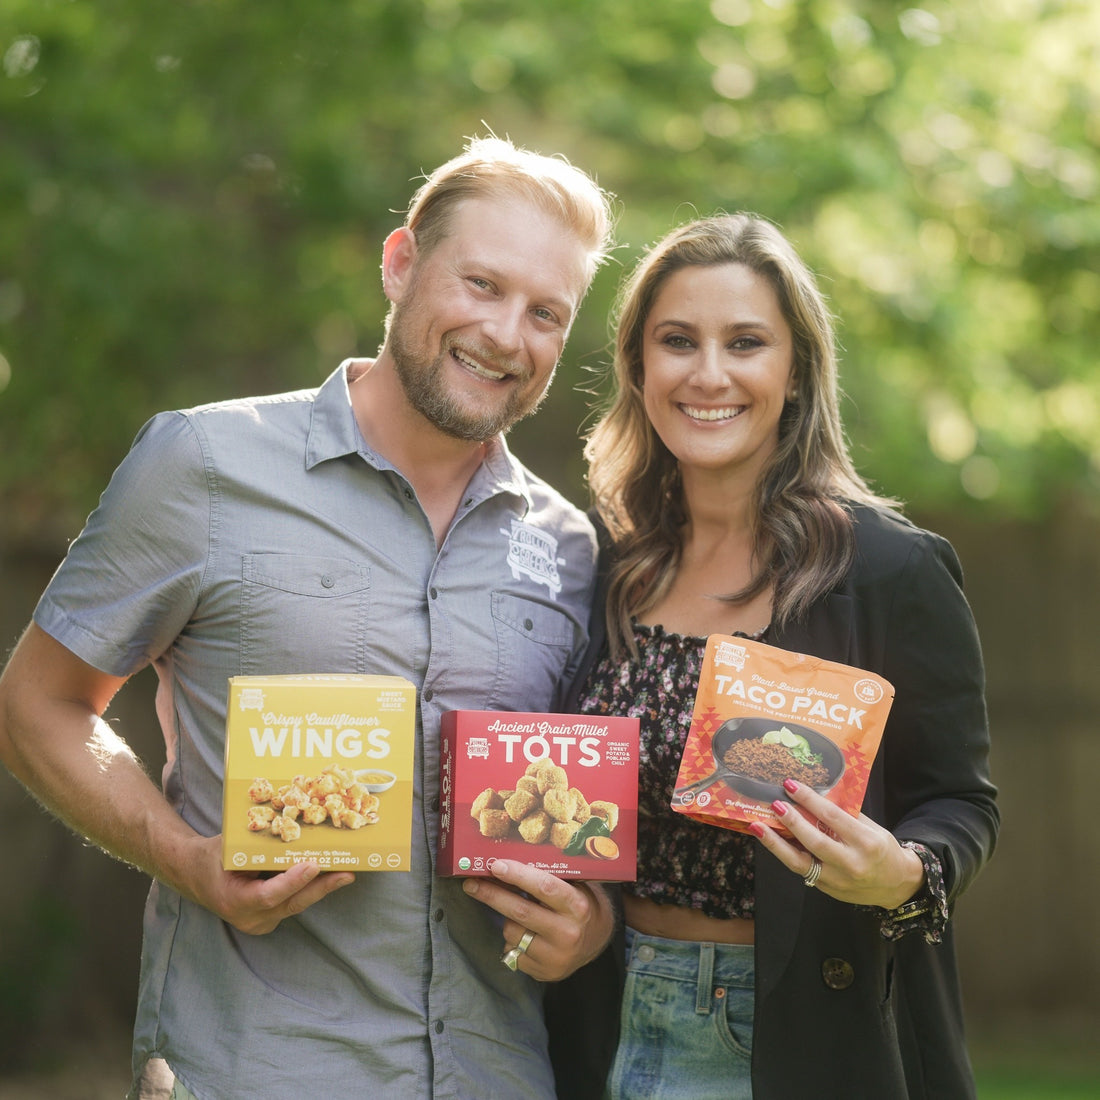 RollinGreens Secures Win For QVC's Best Plant-Based Food Award, And Gears Up For The National Launch Of Their New Plant-Based ME'EAT SKU's